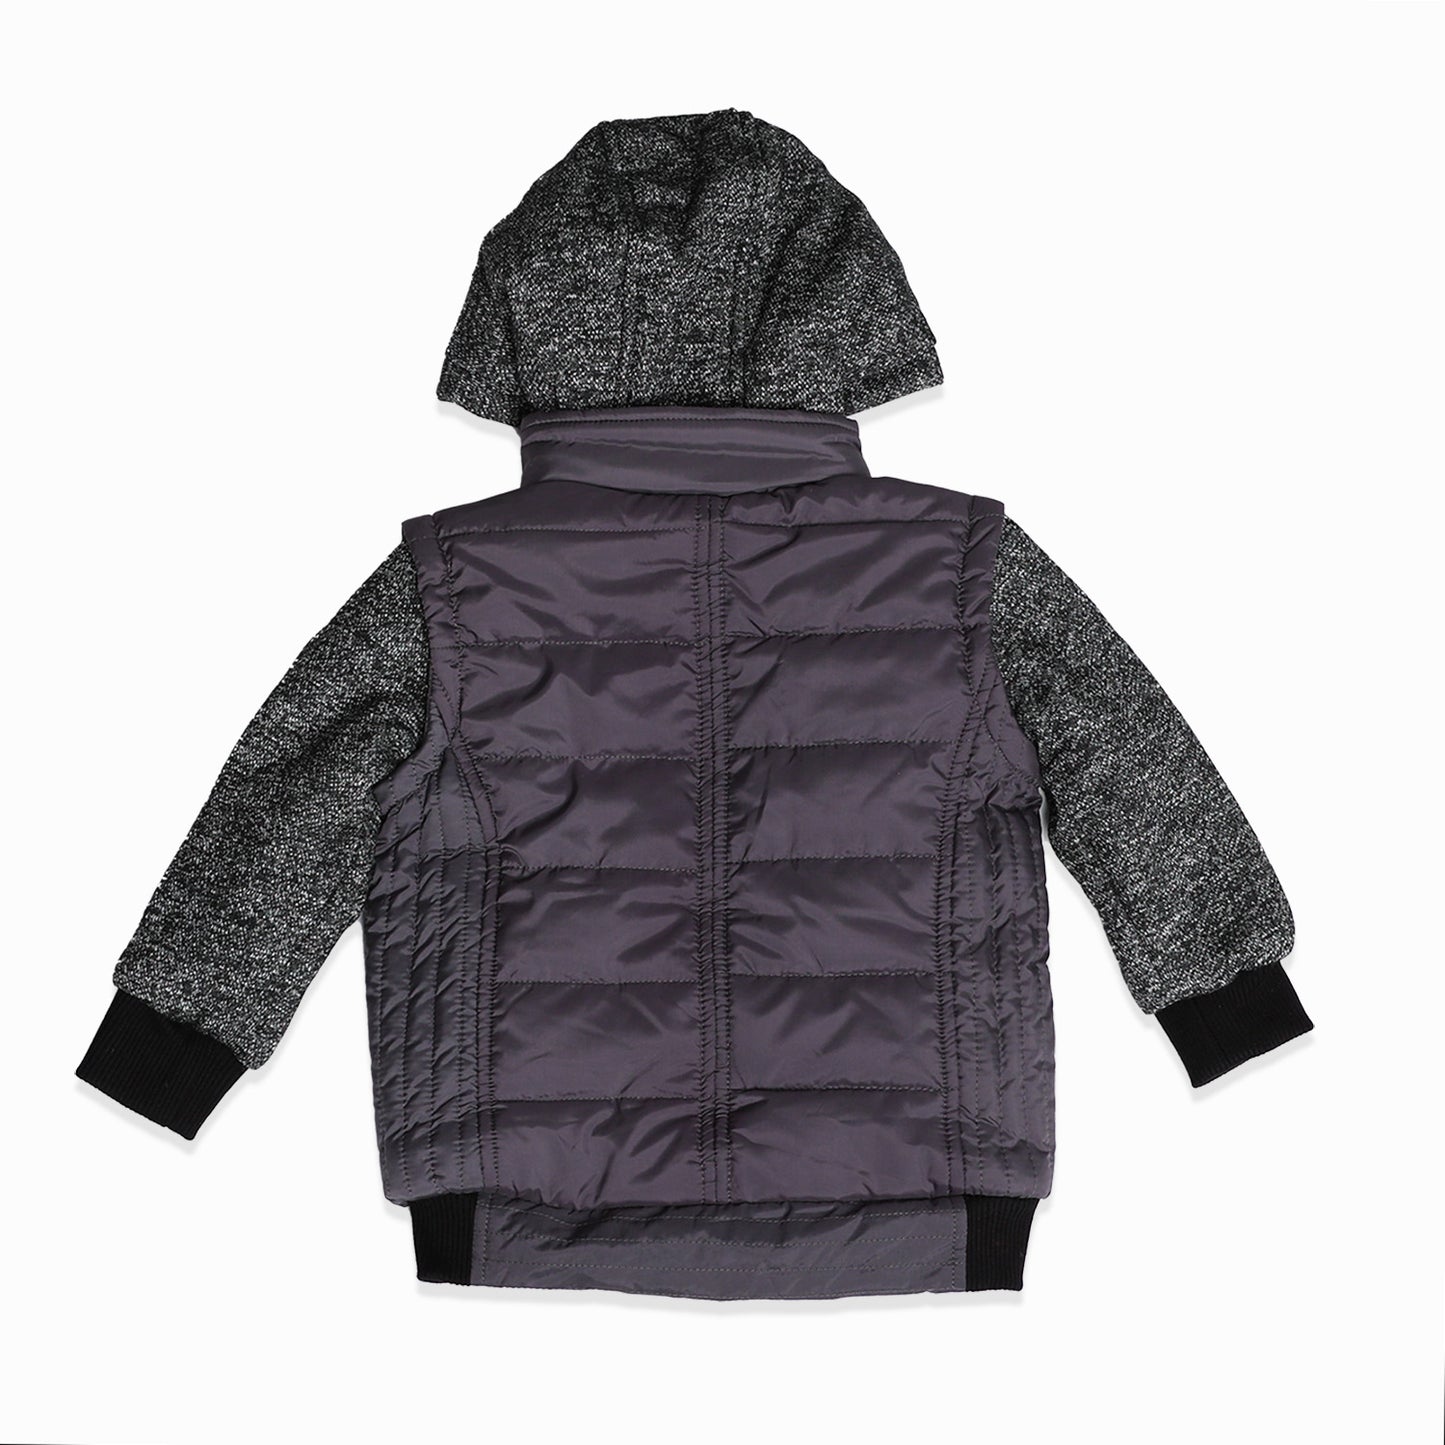 Camo Kid Charcoal Hooded Puffer Jacket - Toddler Boy